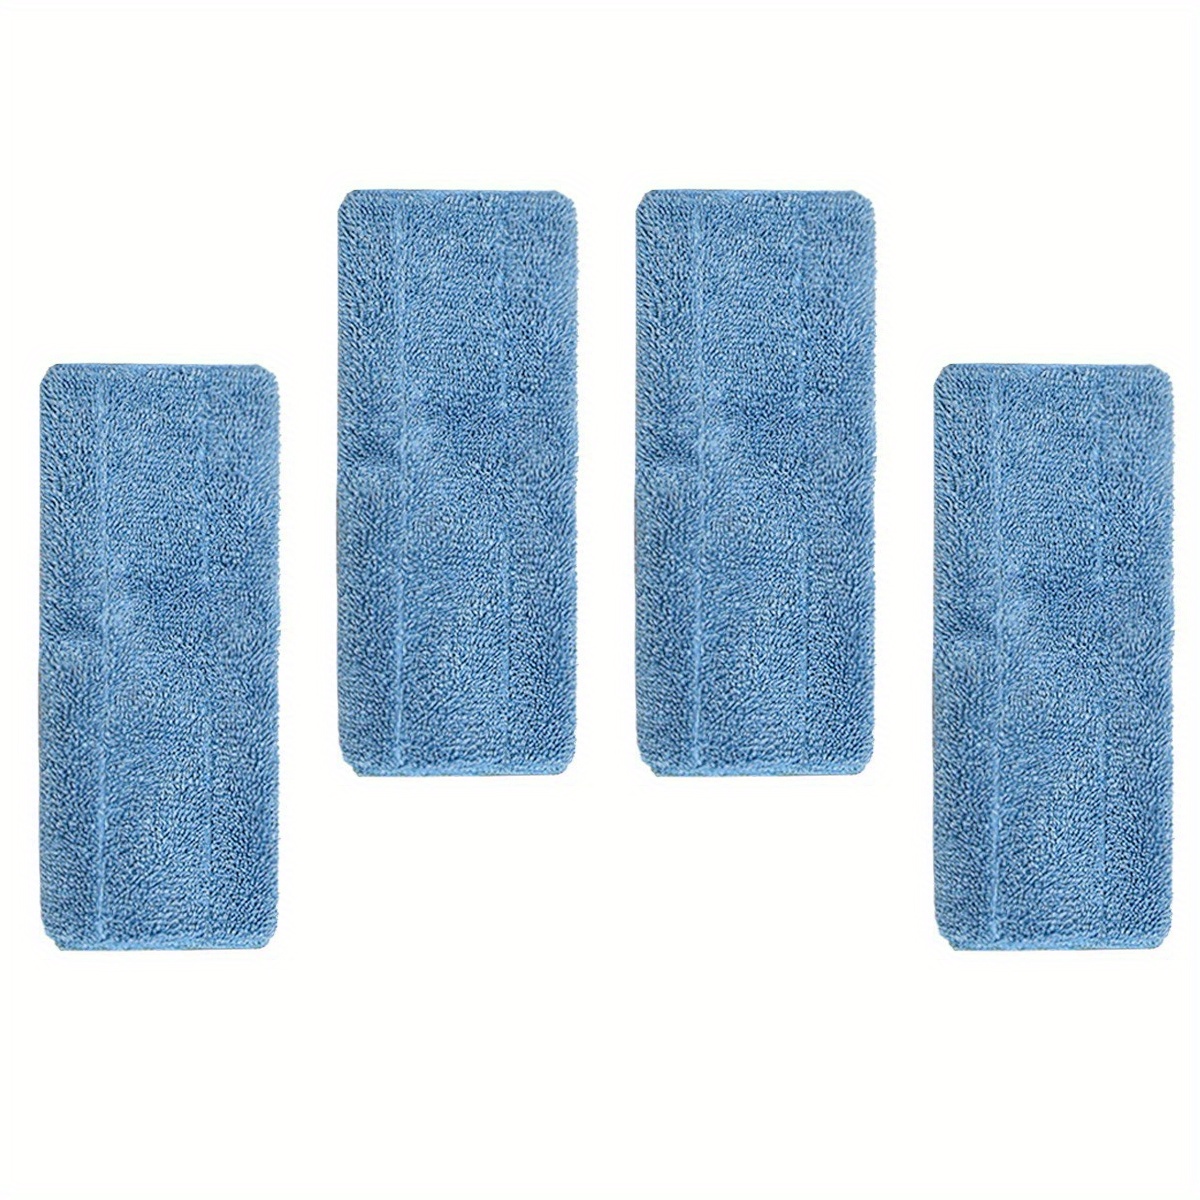 1/2/4pcs, Premium Microfiber Mop Pads Refill Compatible With Sweeper Mop,  Reusable Machine Washable Adhesive Replacement Mop Cloth, Cleaning  Supplies